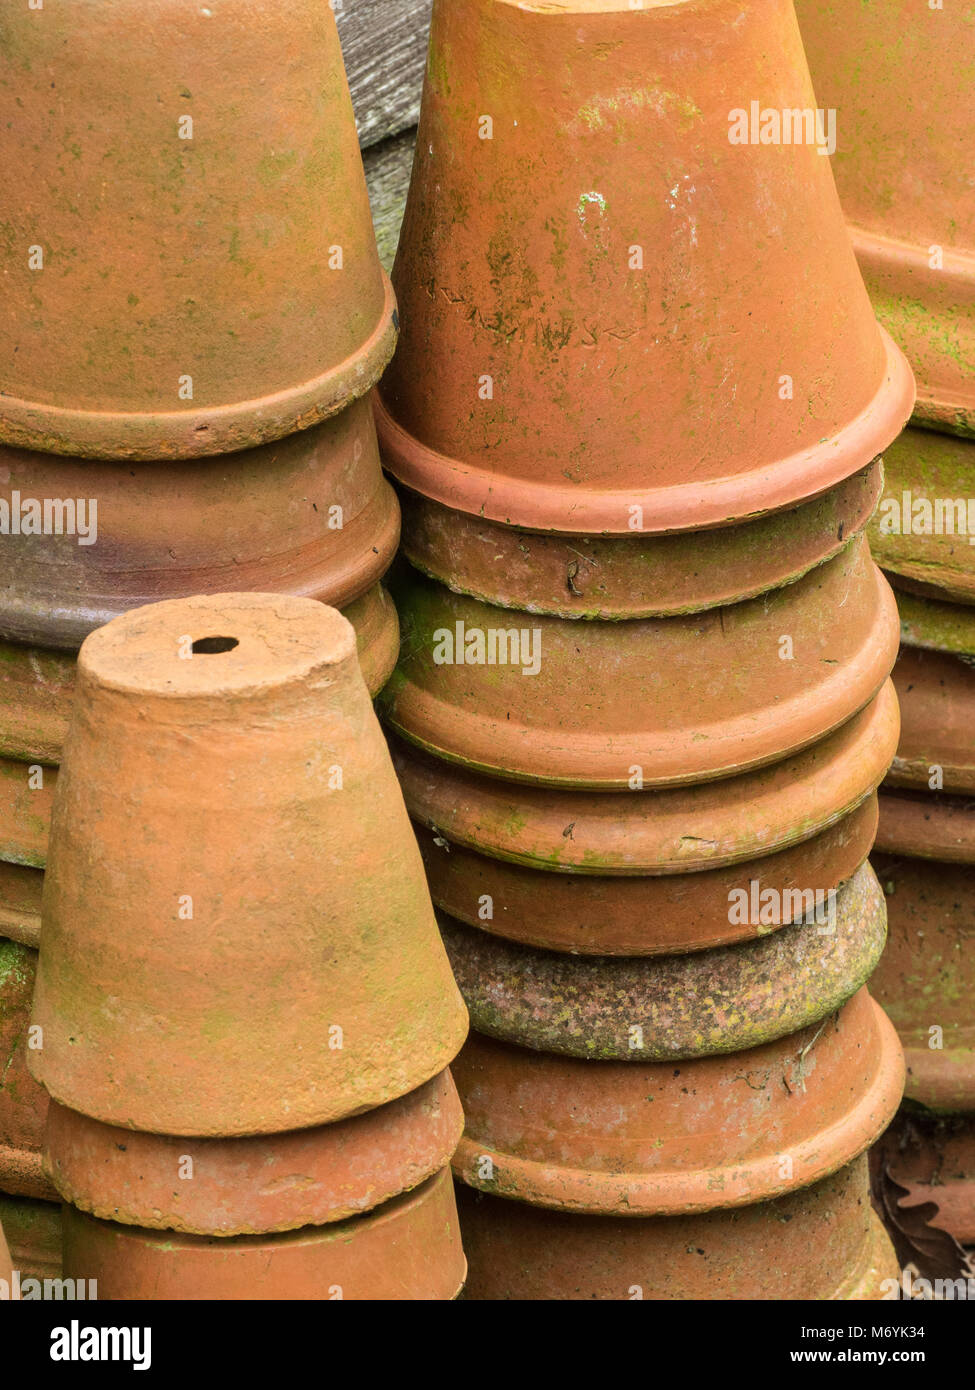 Close up of stacks of old terracotta plants pots Stock Photo